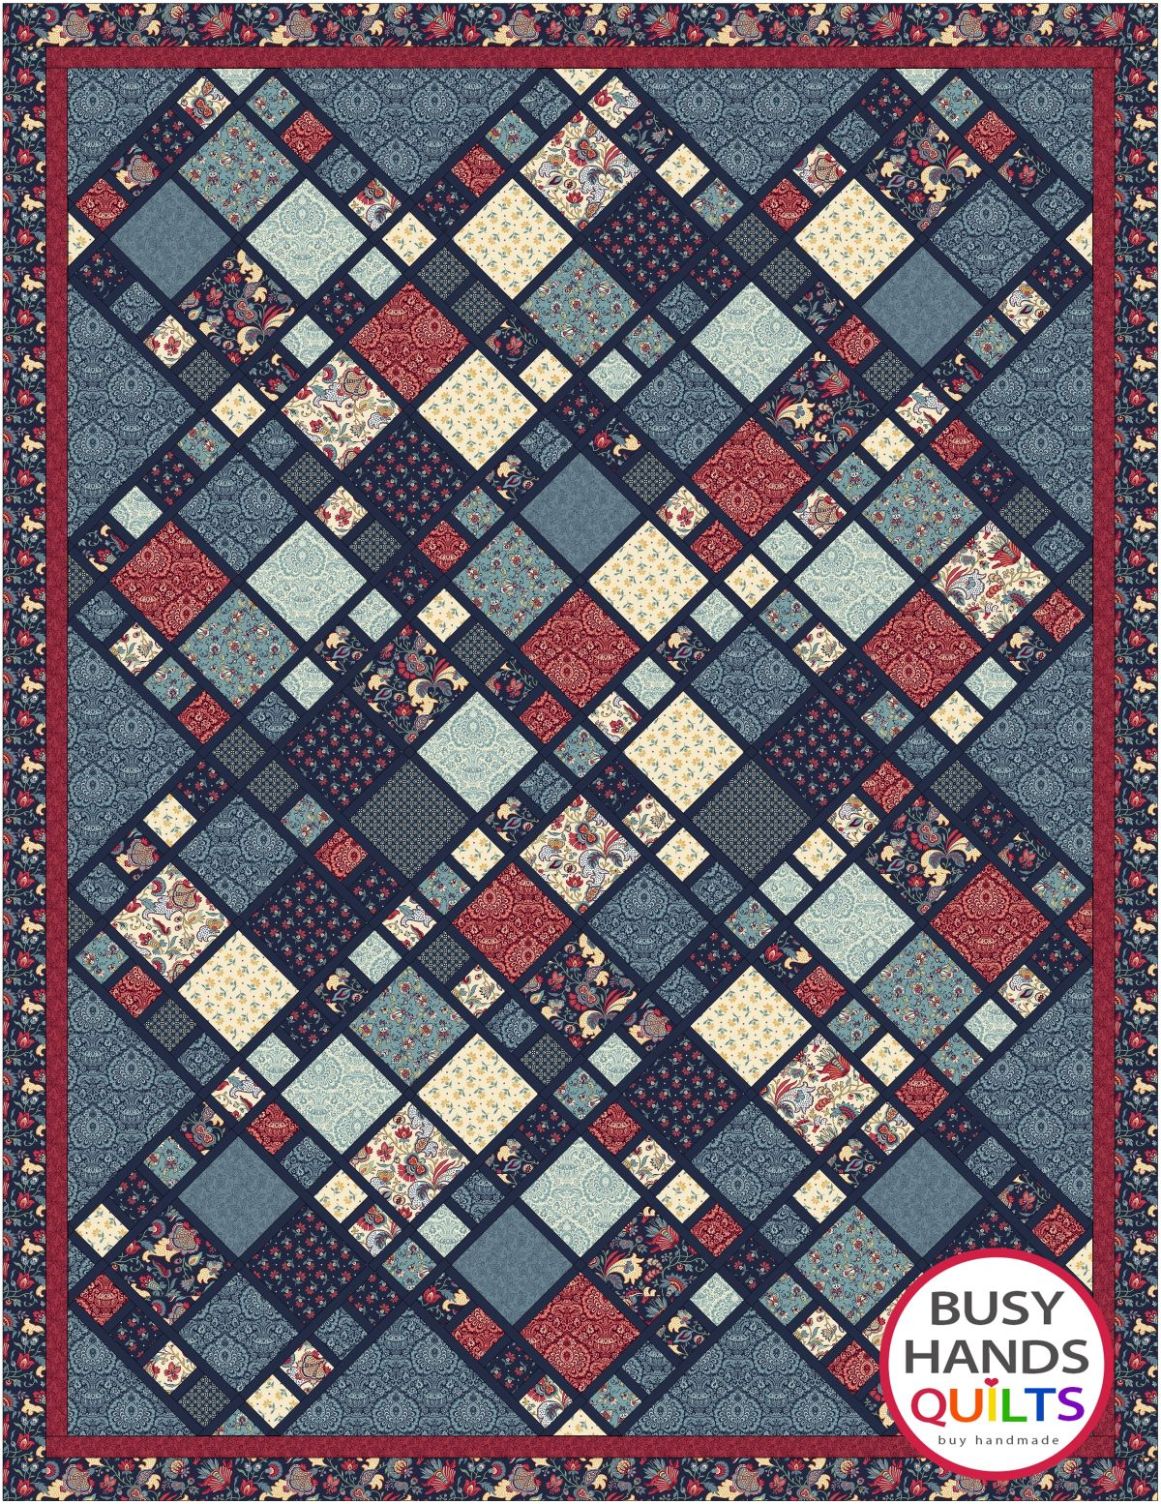 A Scrappy Life Quilt Pattern PRINTED